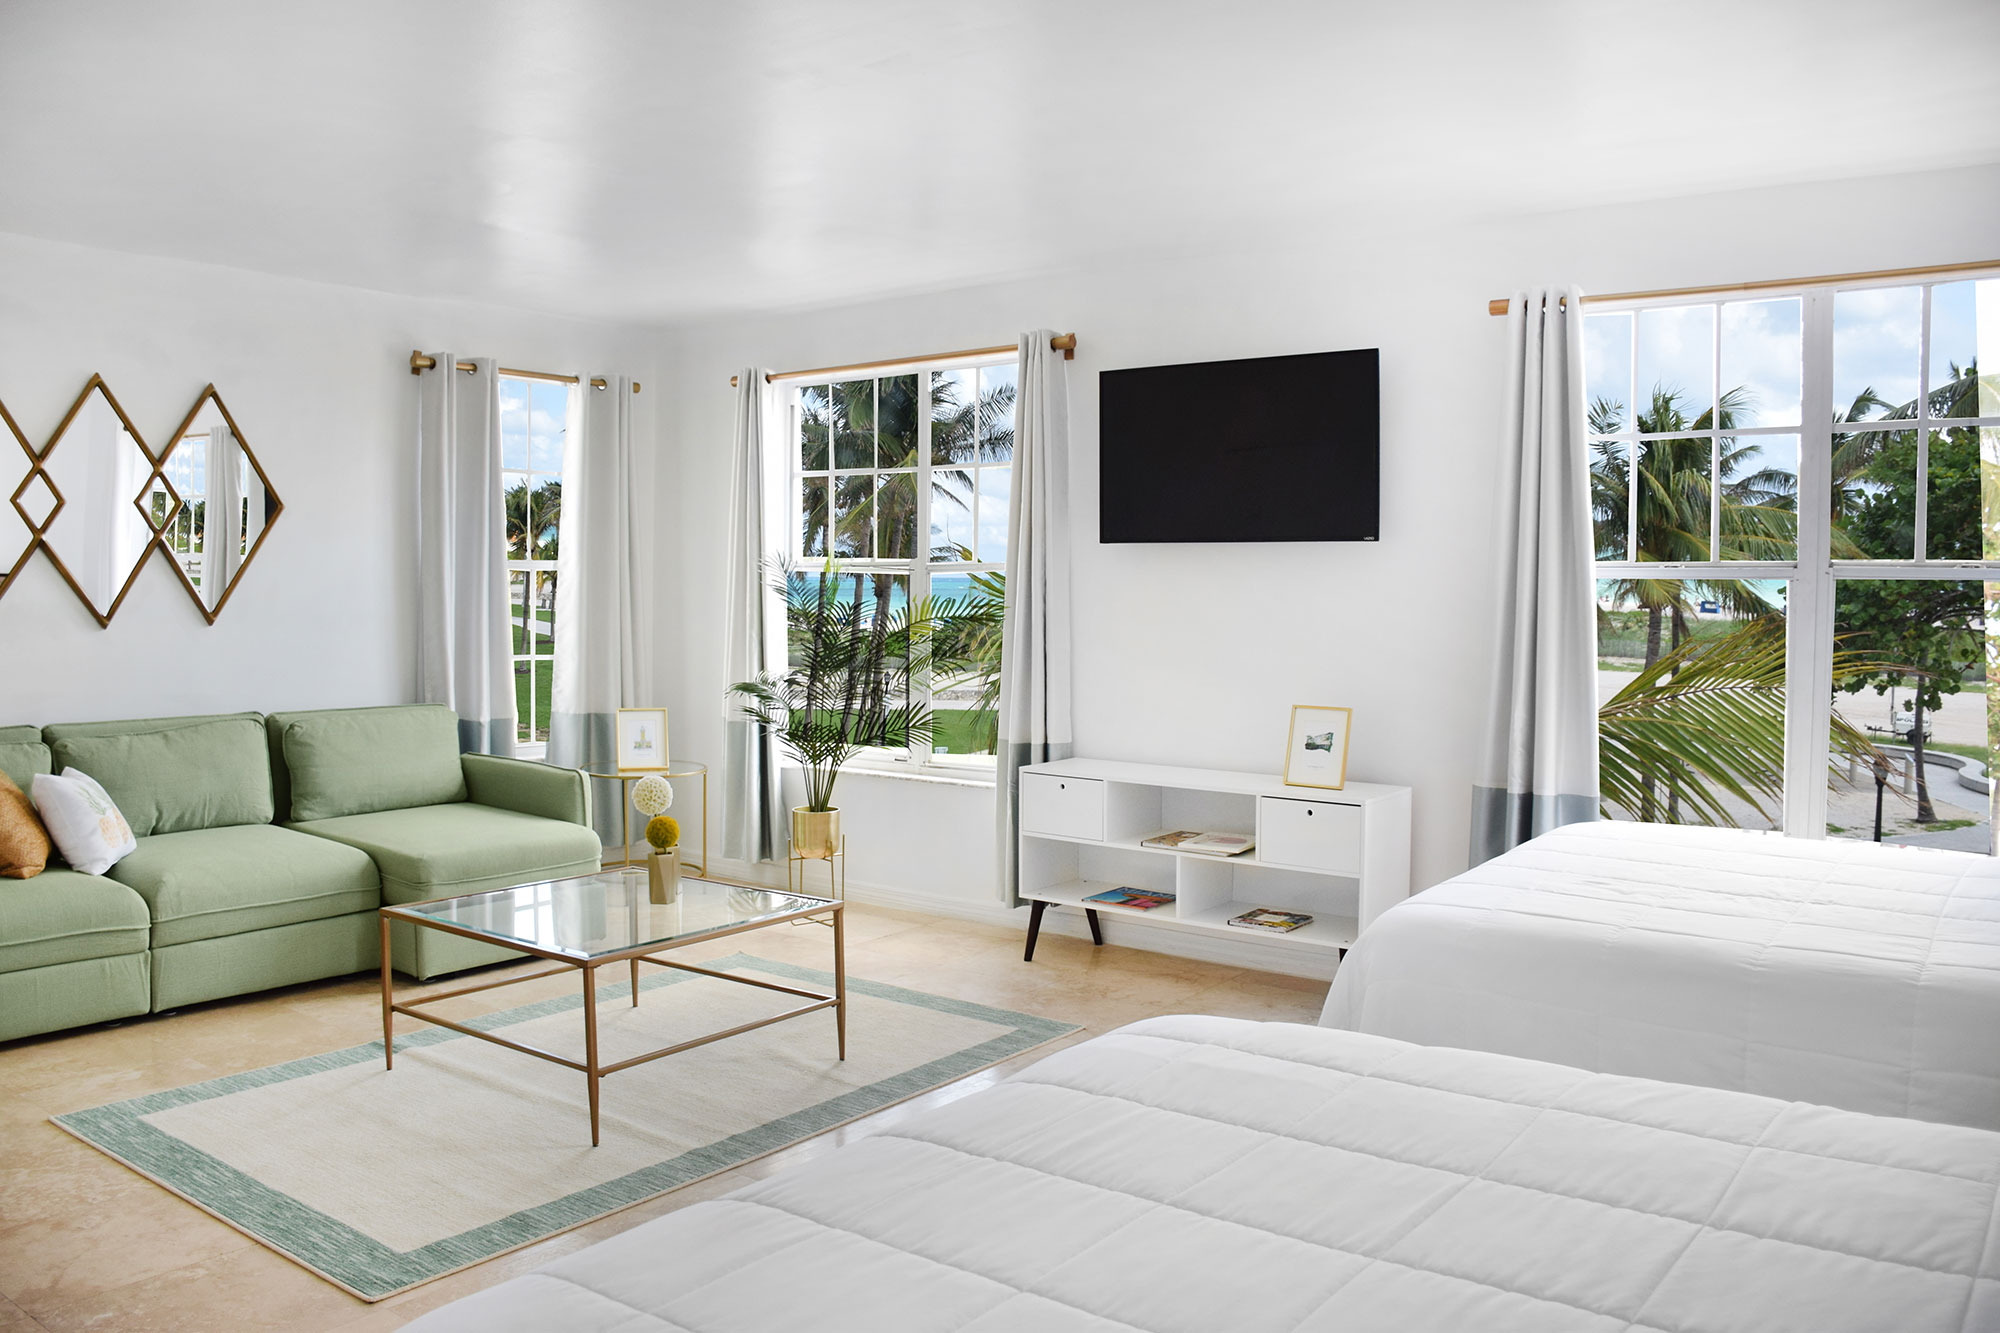 Suite at Beack Park Hotel on Ocean Drive Miami Beach